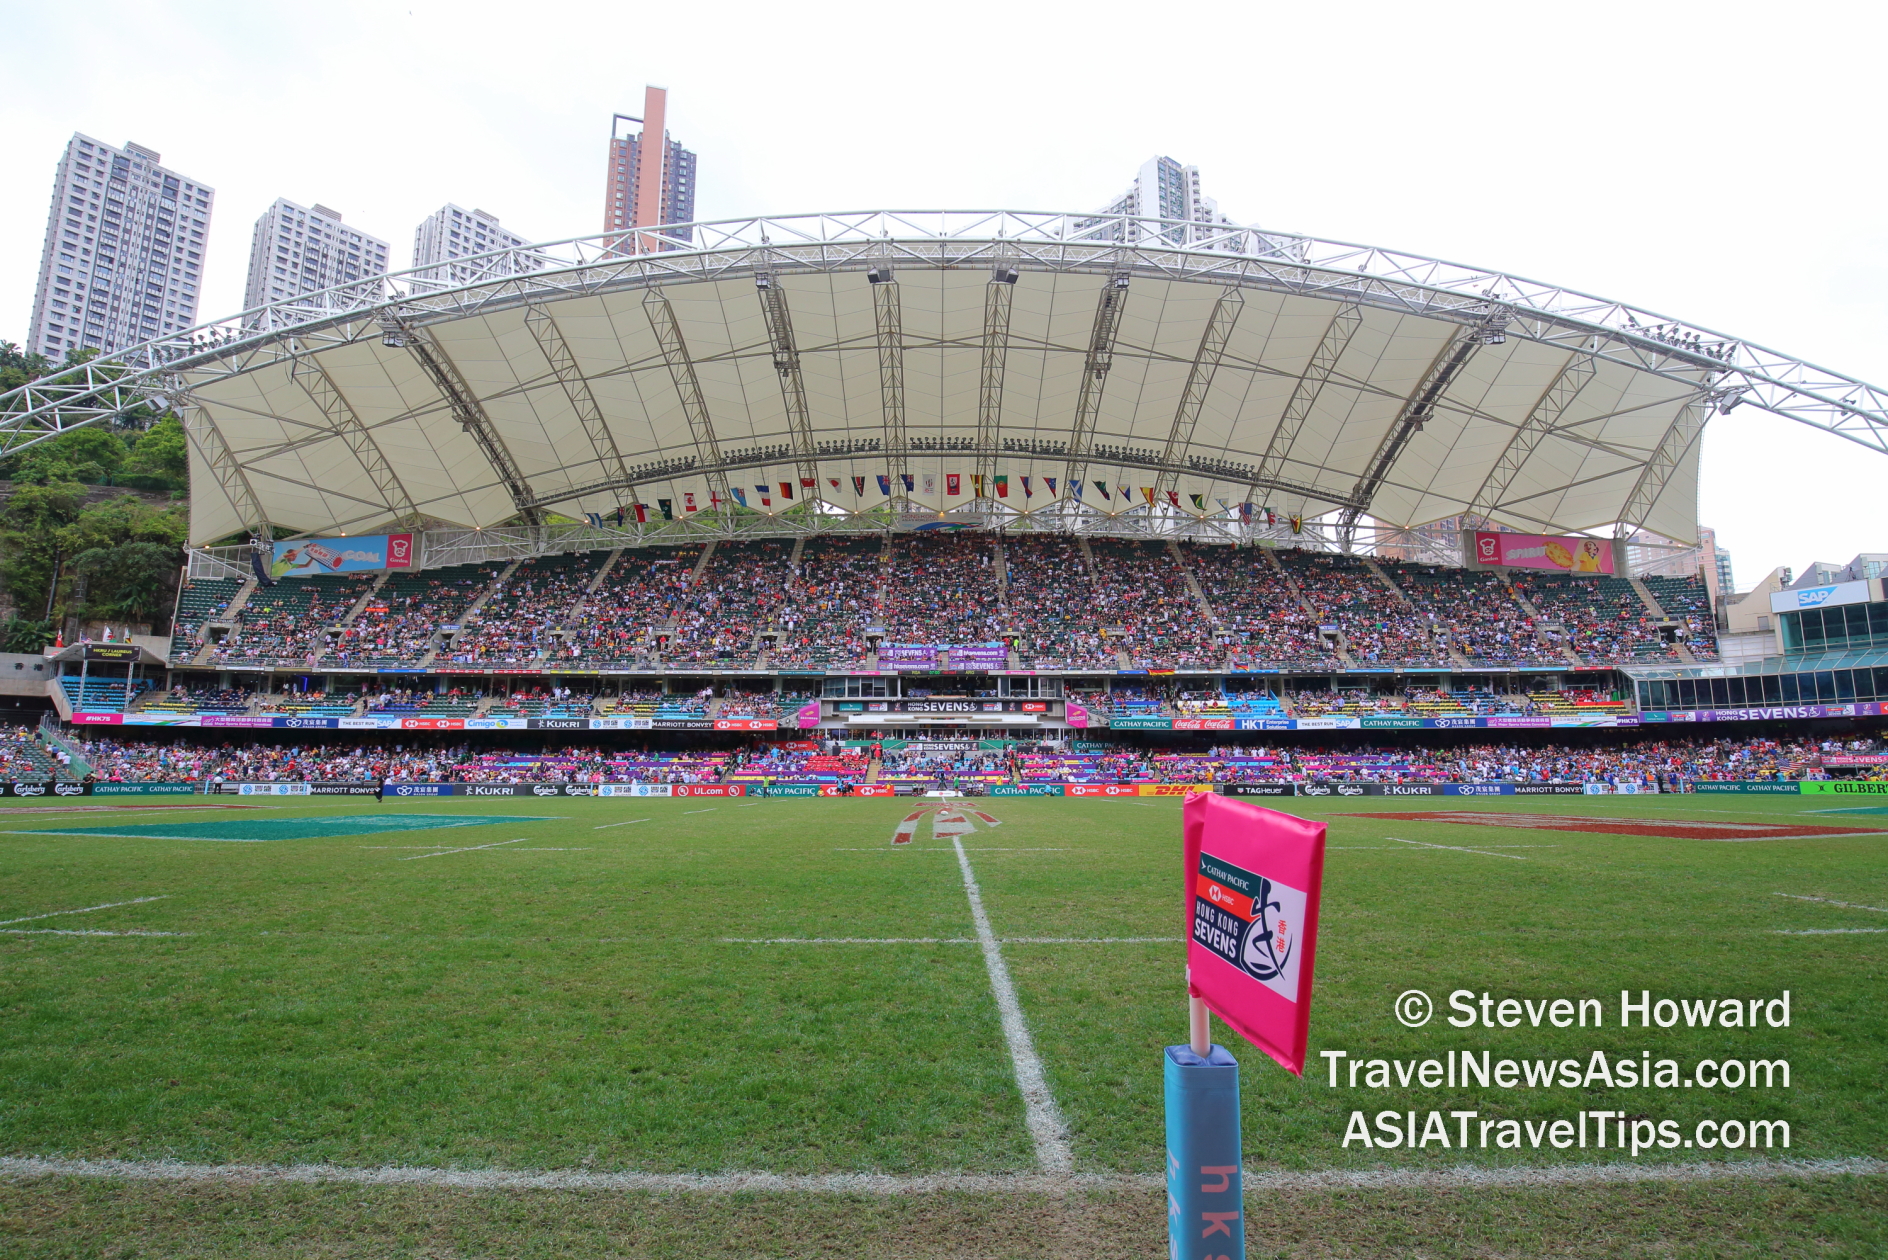 The HK7s is widely regarded as the best rugby sevens party in the world. Picture by Steven Howard of TravelNewsAsia.com Click to enlarge.